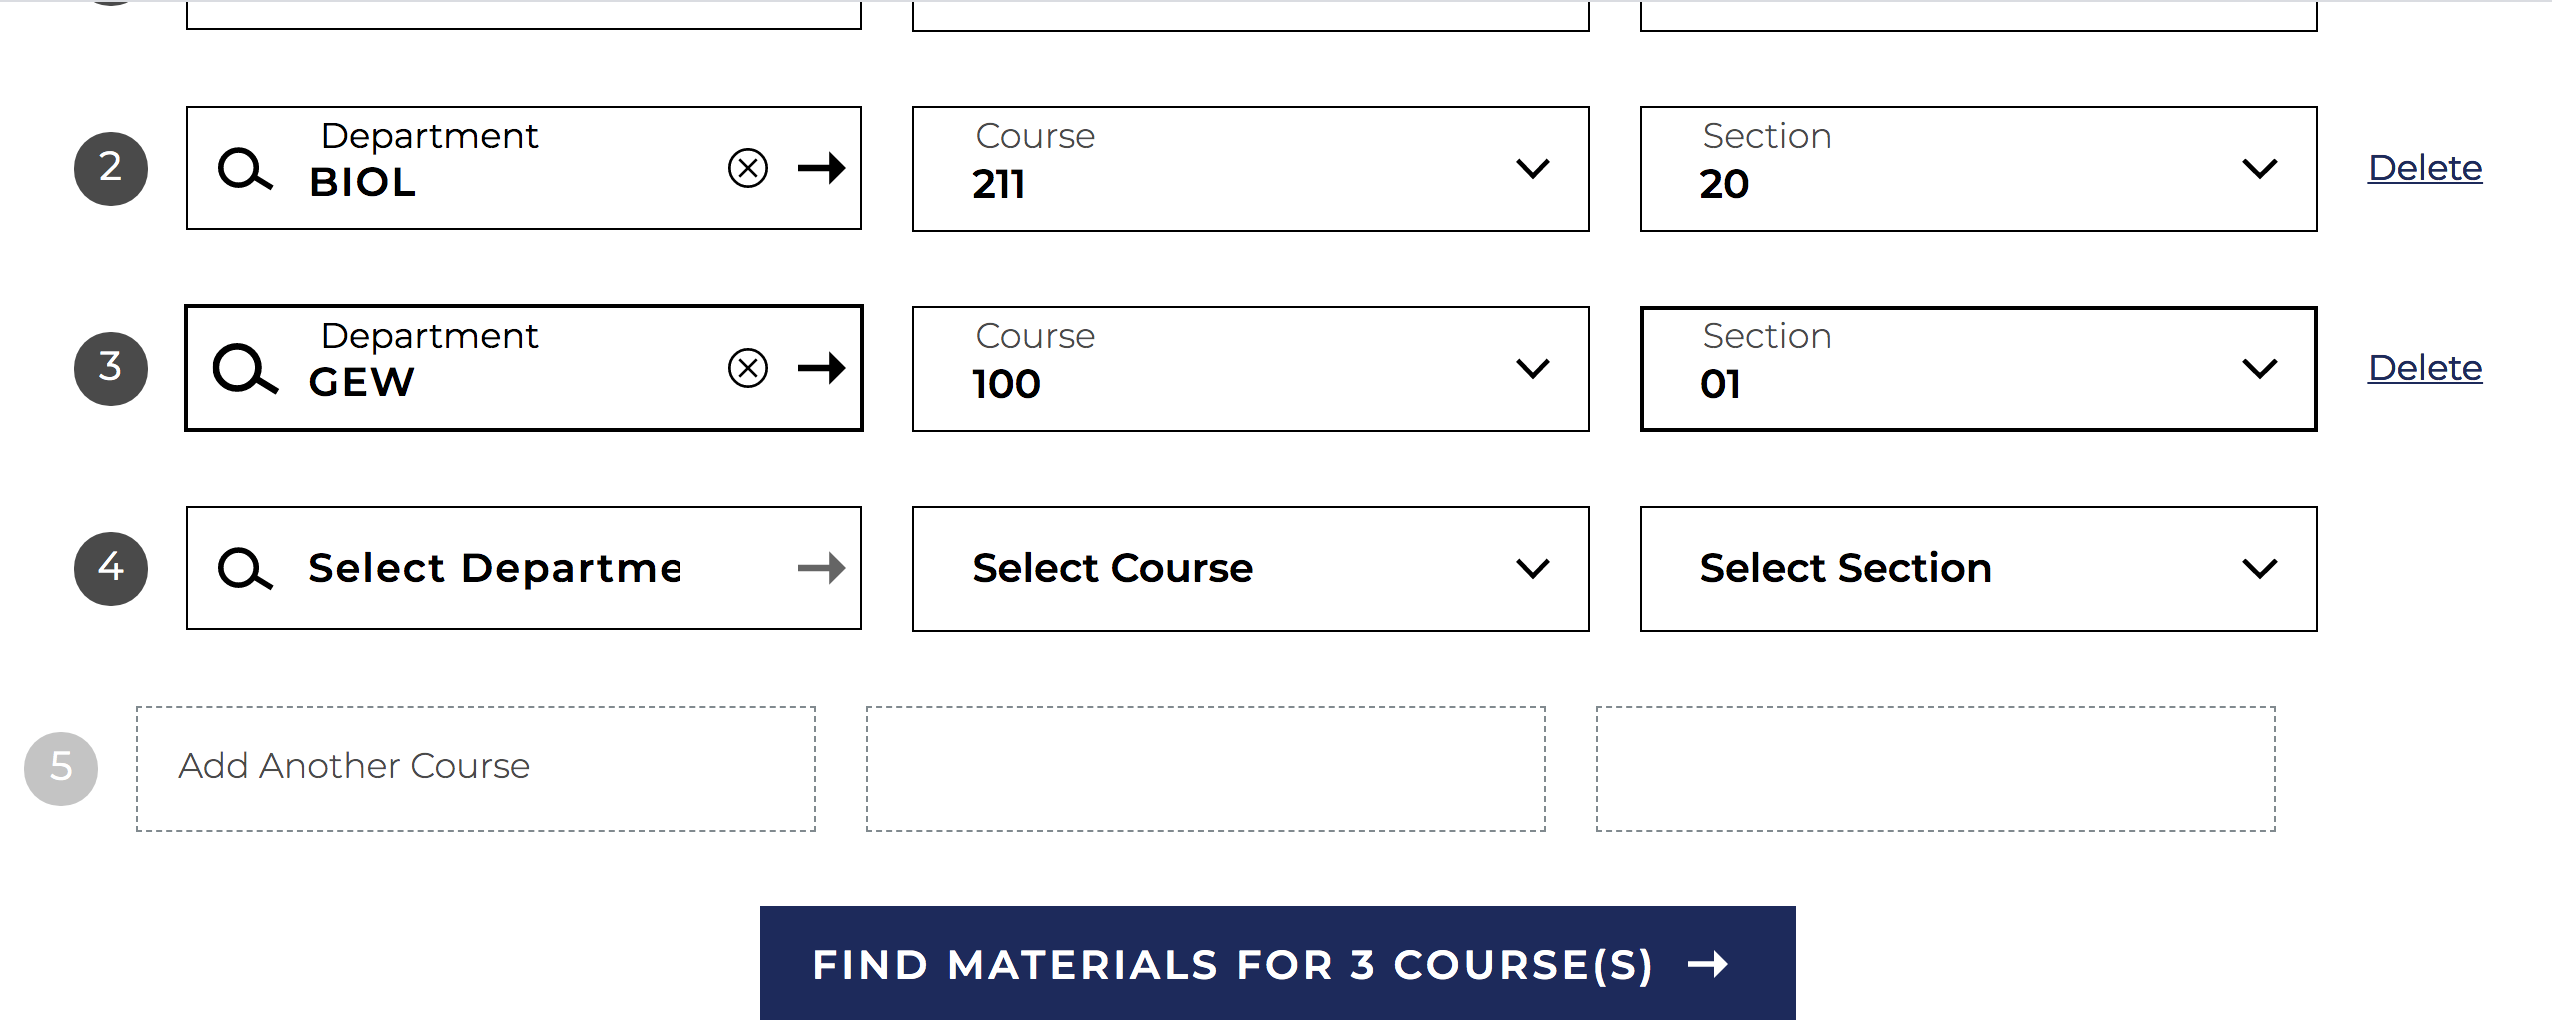 A list of courses and "Find Materials" button